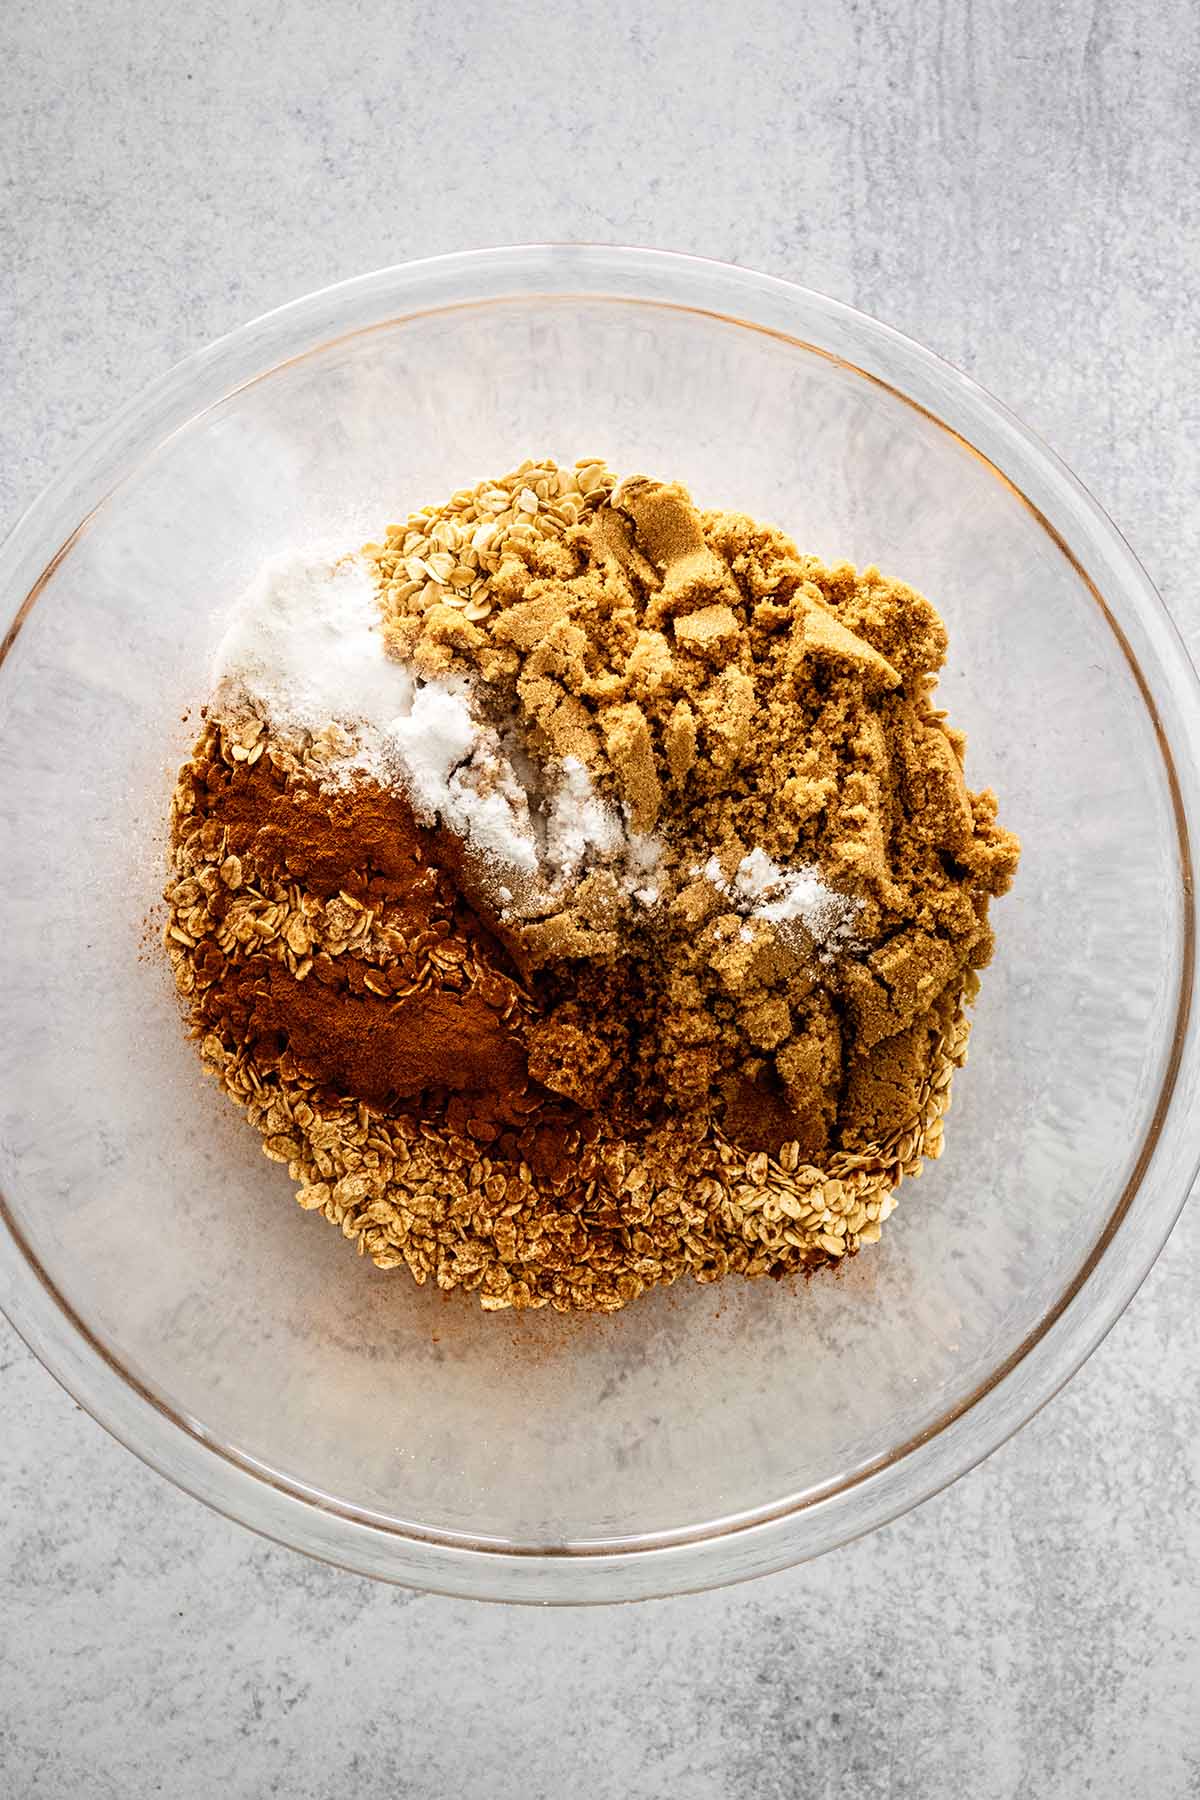 Dry ingredients in a glass bowl